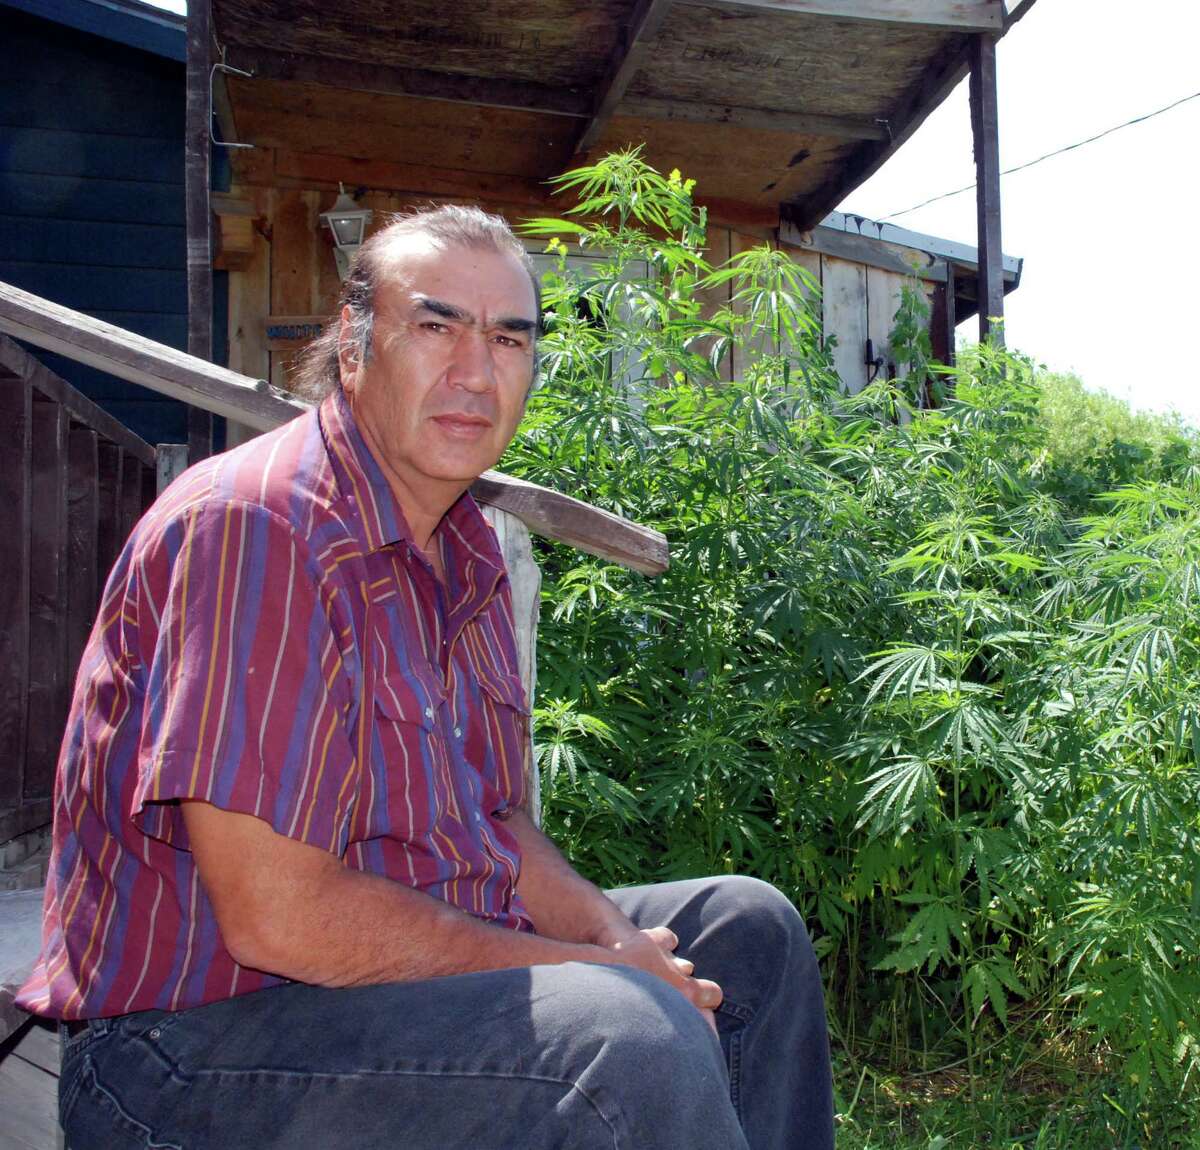 Alex White Plume at home in Manderson, S.D., with hemp plants that grew from DEA-raid seeds.sits on the back steps of his house near Manderson, S.D., on Tuesday, June 26, 2007, near some hemp plants that grew from seeds knocked off plants confiscated by federal drug agents. White Plume sought to grow hemp, a cousin of marijuana with only a trace of marijuana's drug, on his ranch on the Pine Ridge Indian Reservation. (AP Photo/Chet Brokaw)